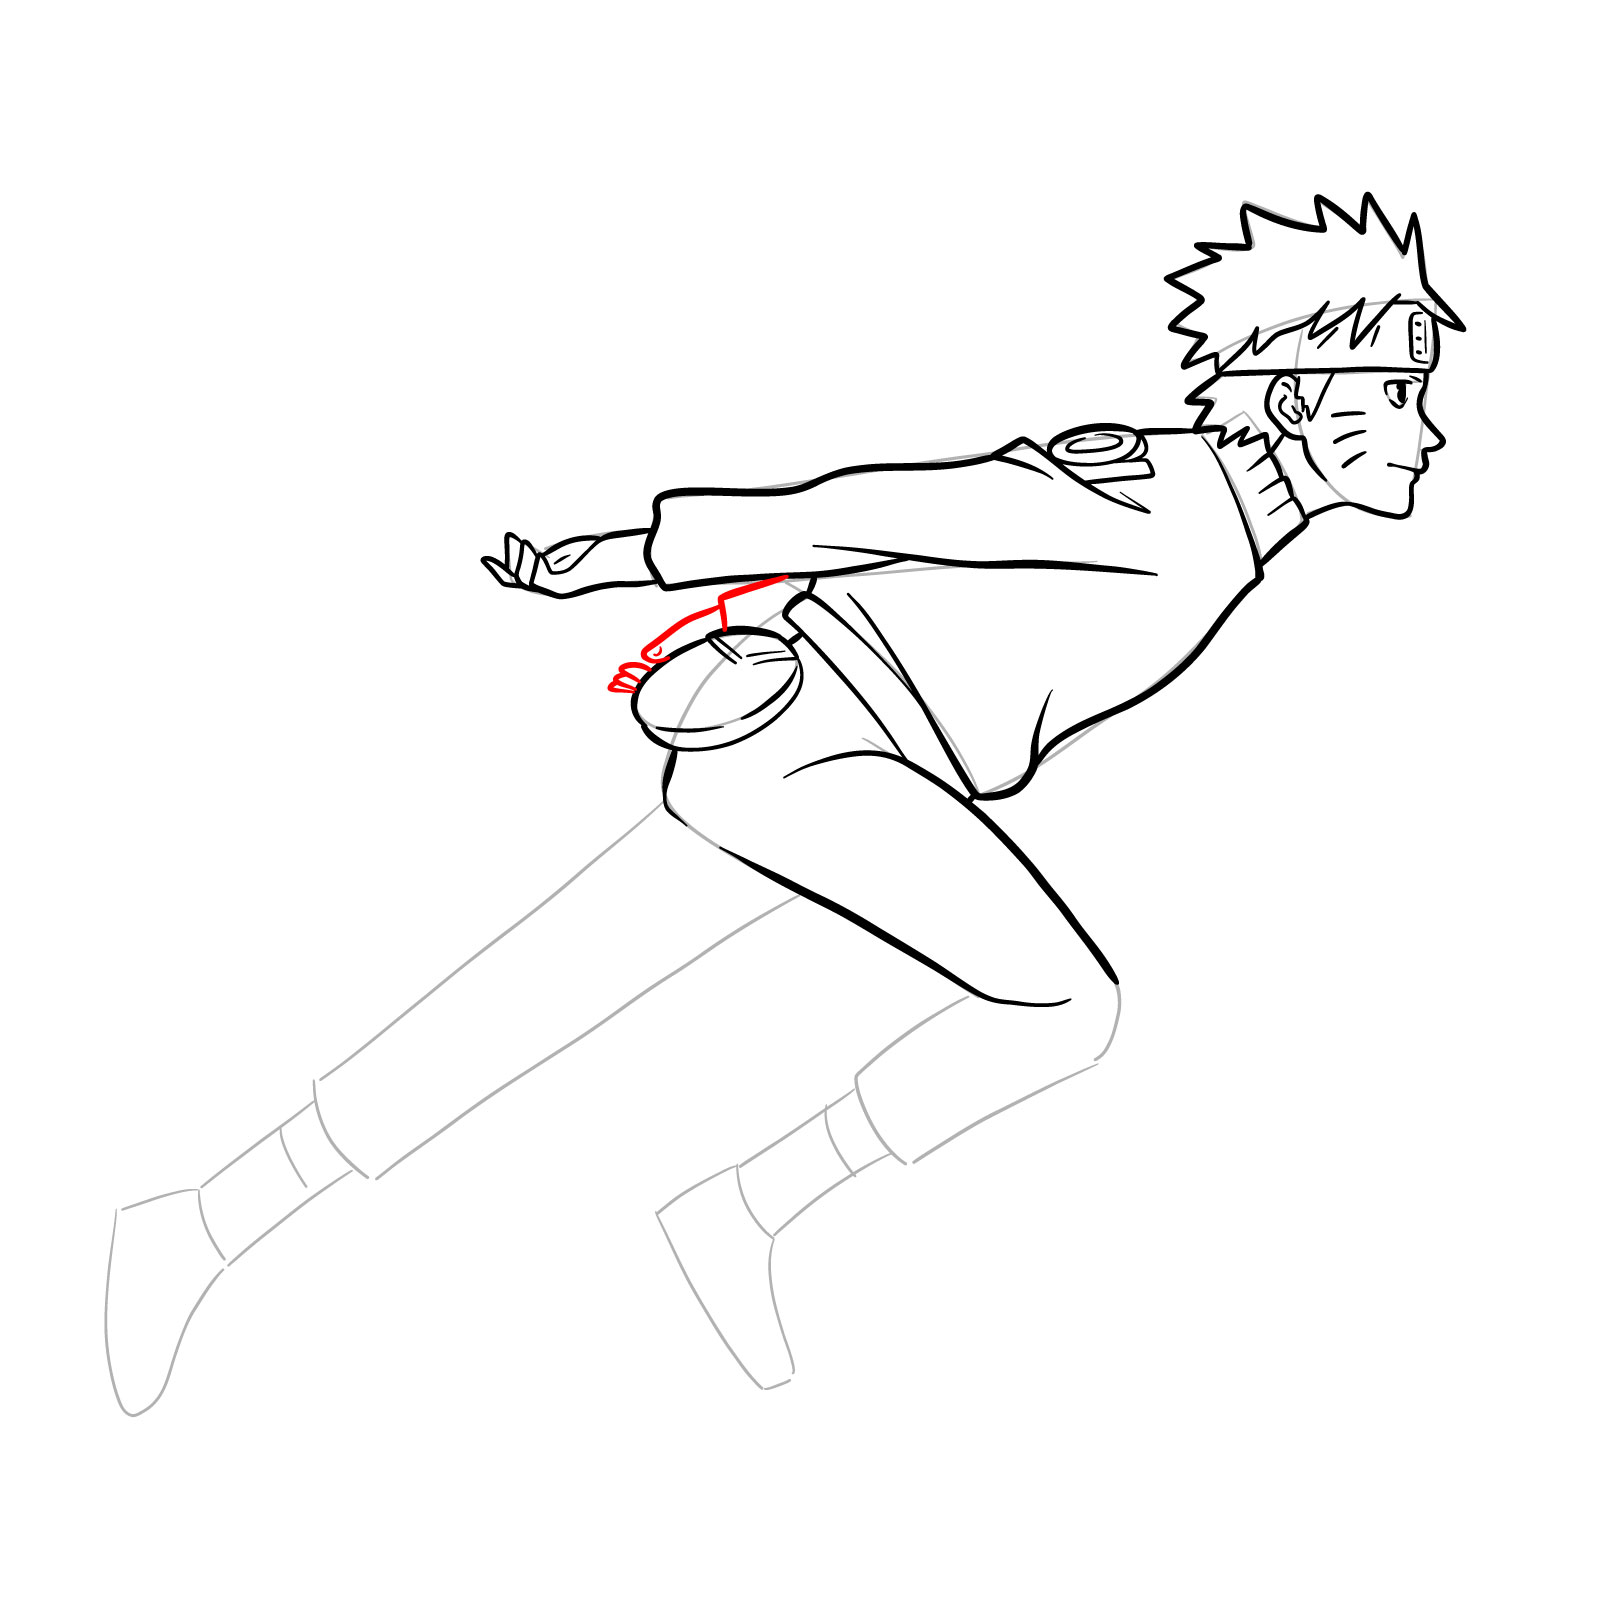 How to draw Naruto running - step 27